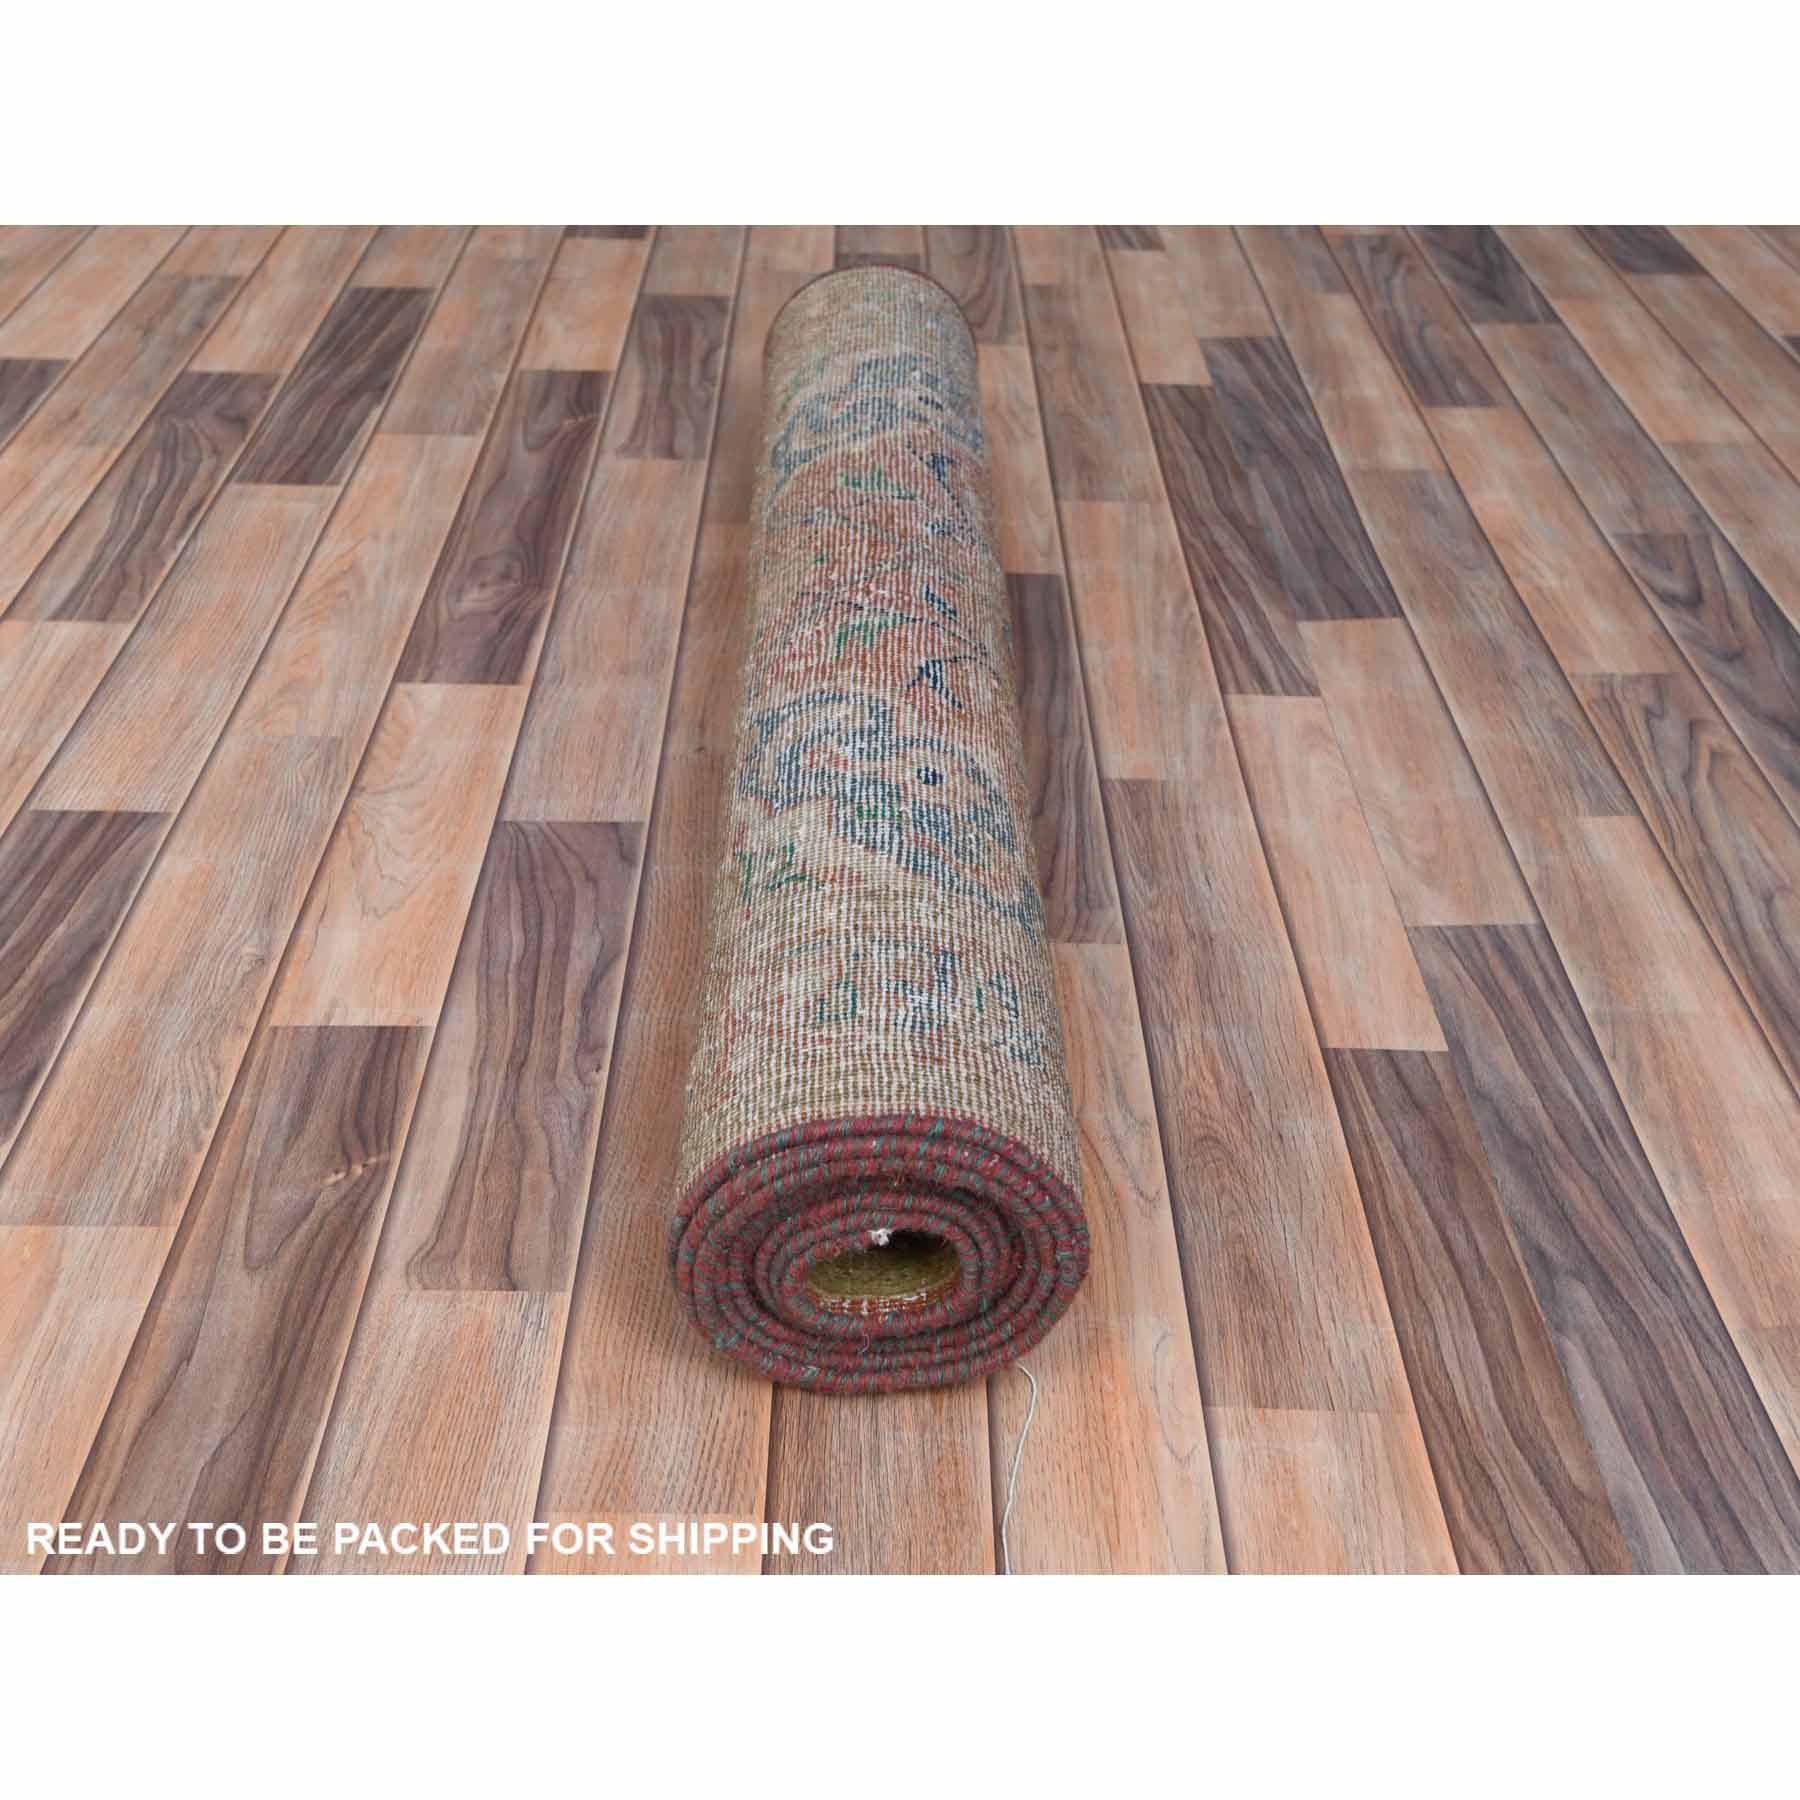 Overdyed-Vintage-Hand-Knotted-Rug-405245